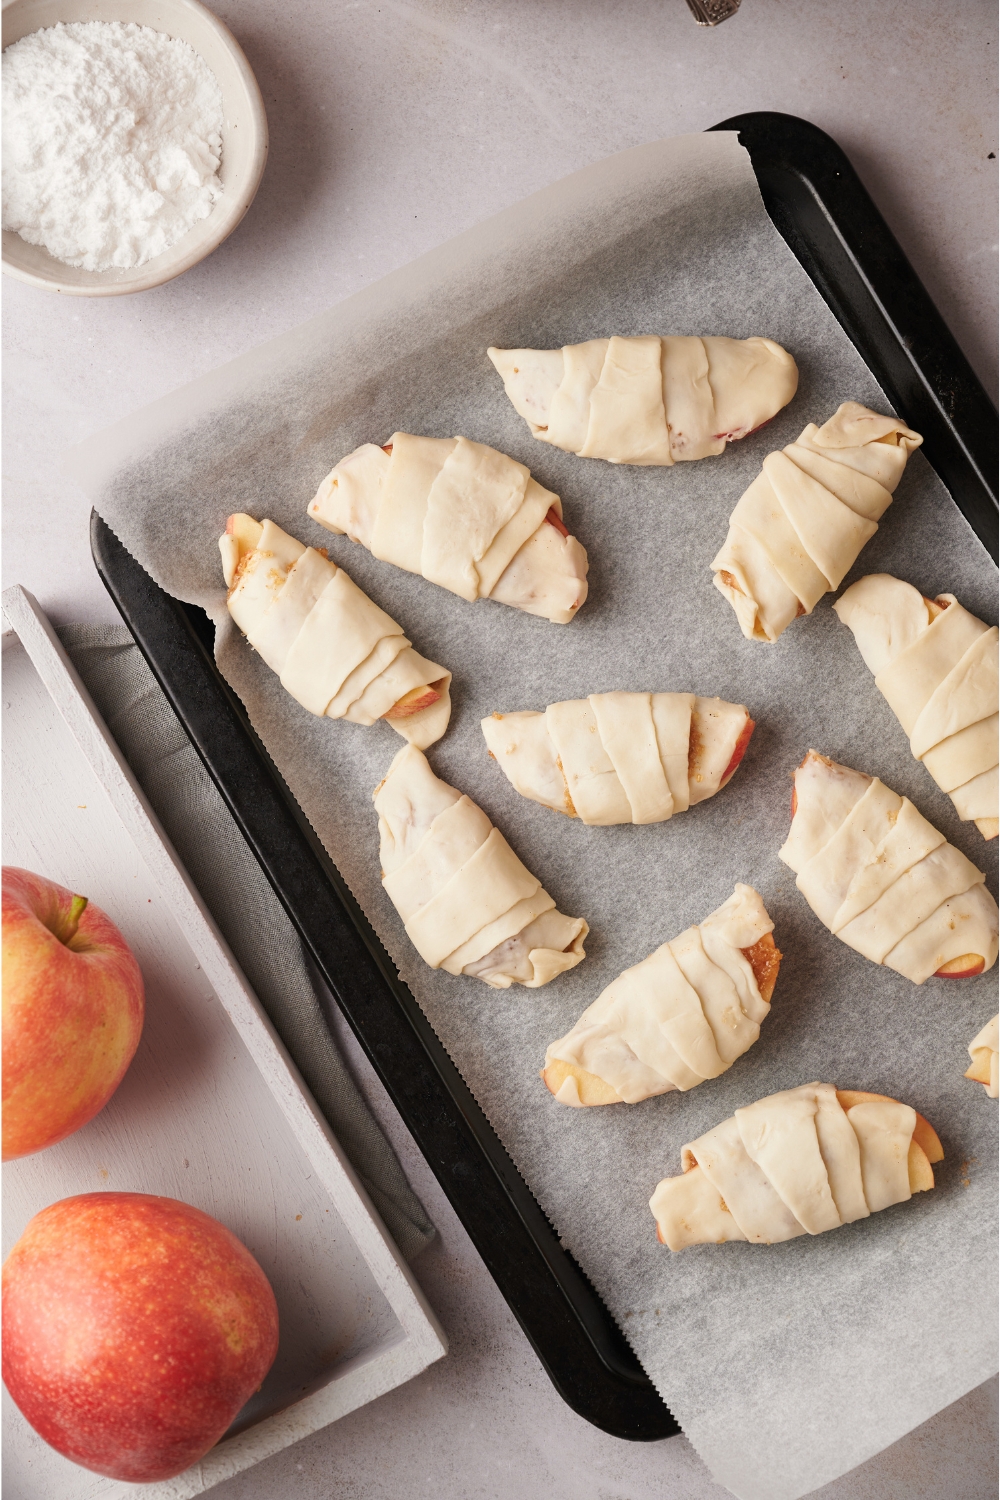 Unbaked apple turnovers wrapped in crescent roll dough on a baking sheet lined with parchment paper.